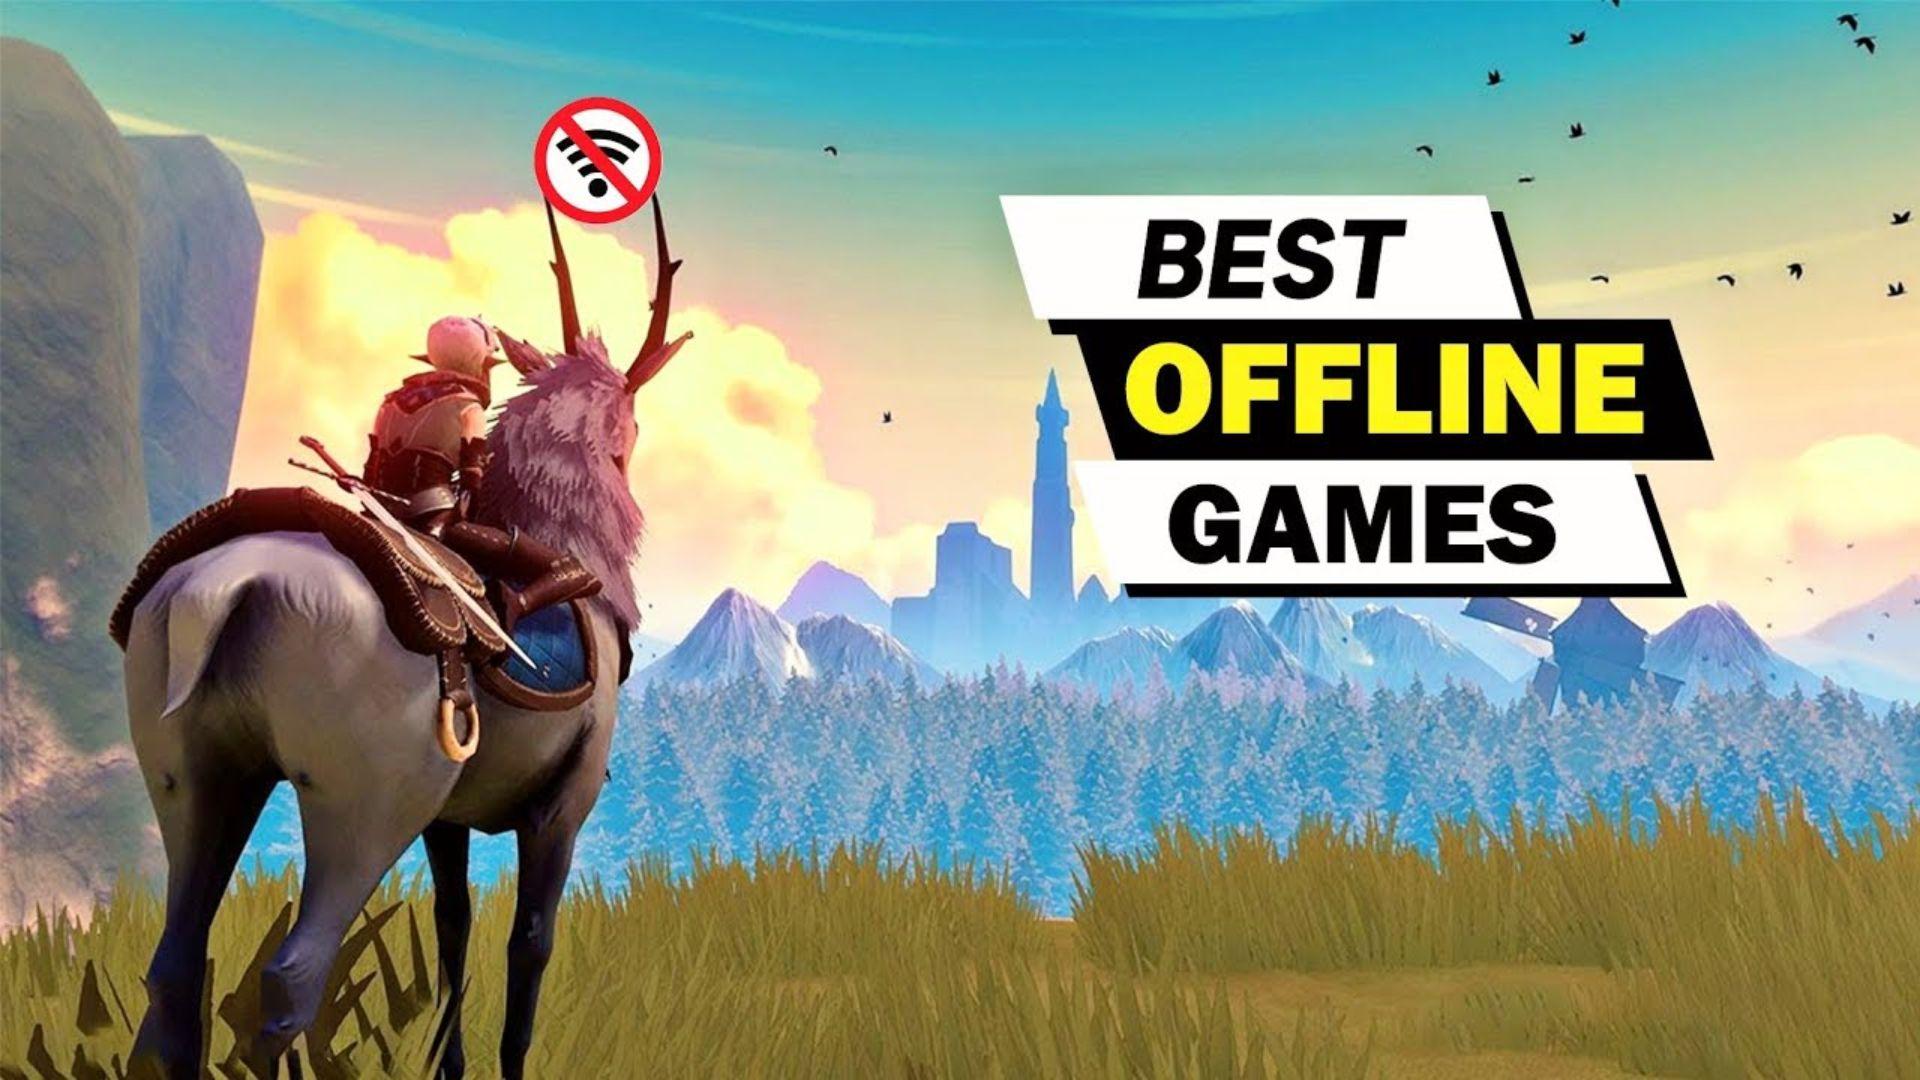 The 10 Best Offline Games for Free